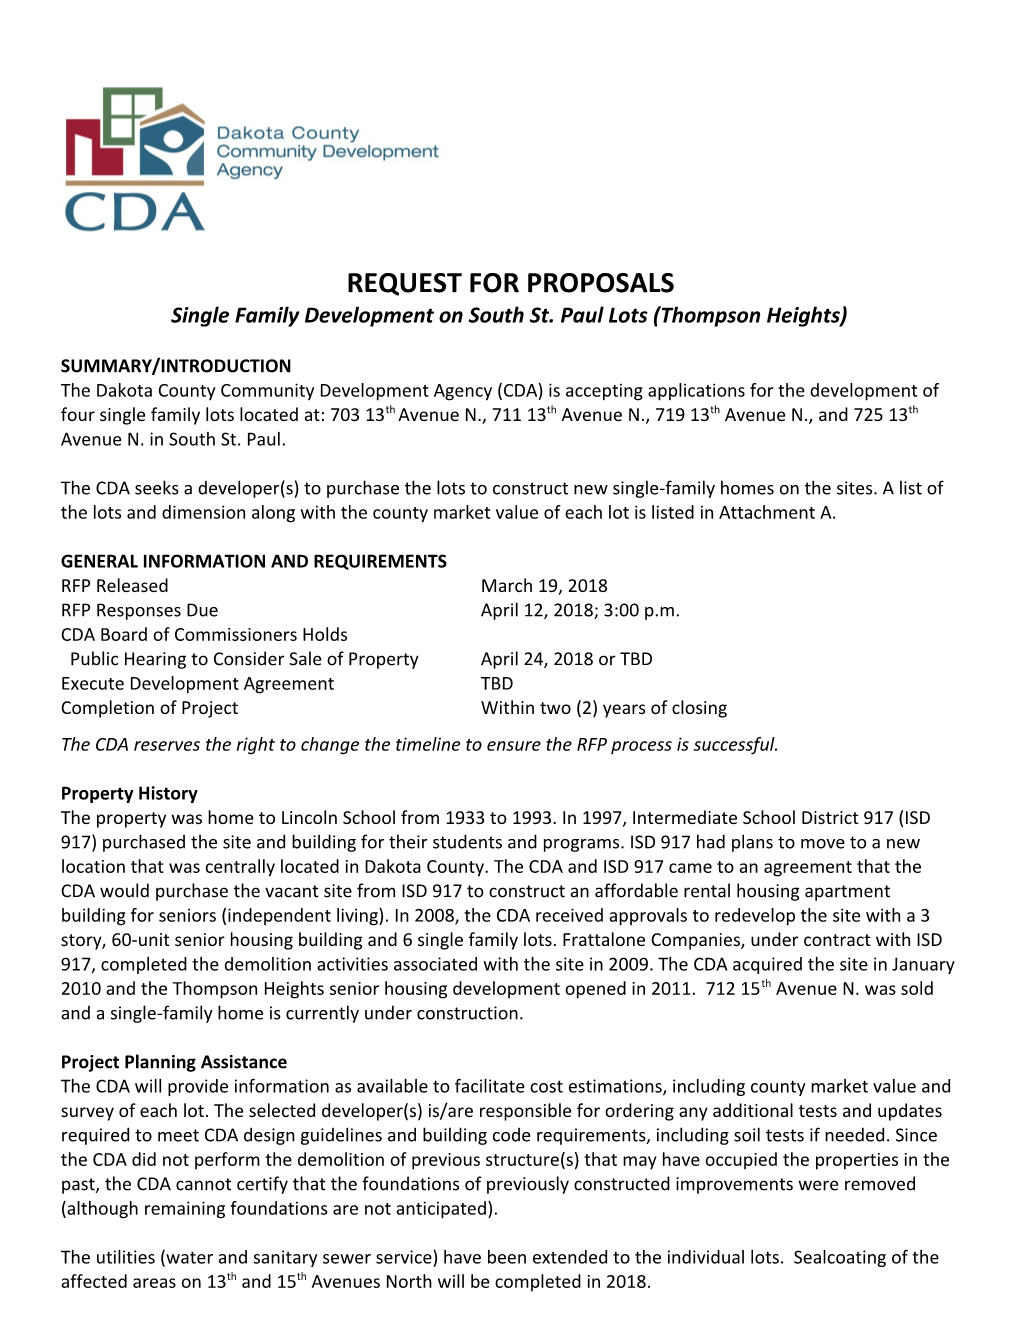 REQUEST for PROPOSALS Single Family Development on South St. Paul Lots (Thompson Heights)